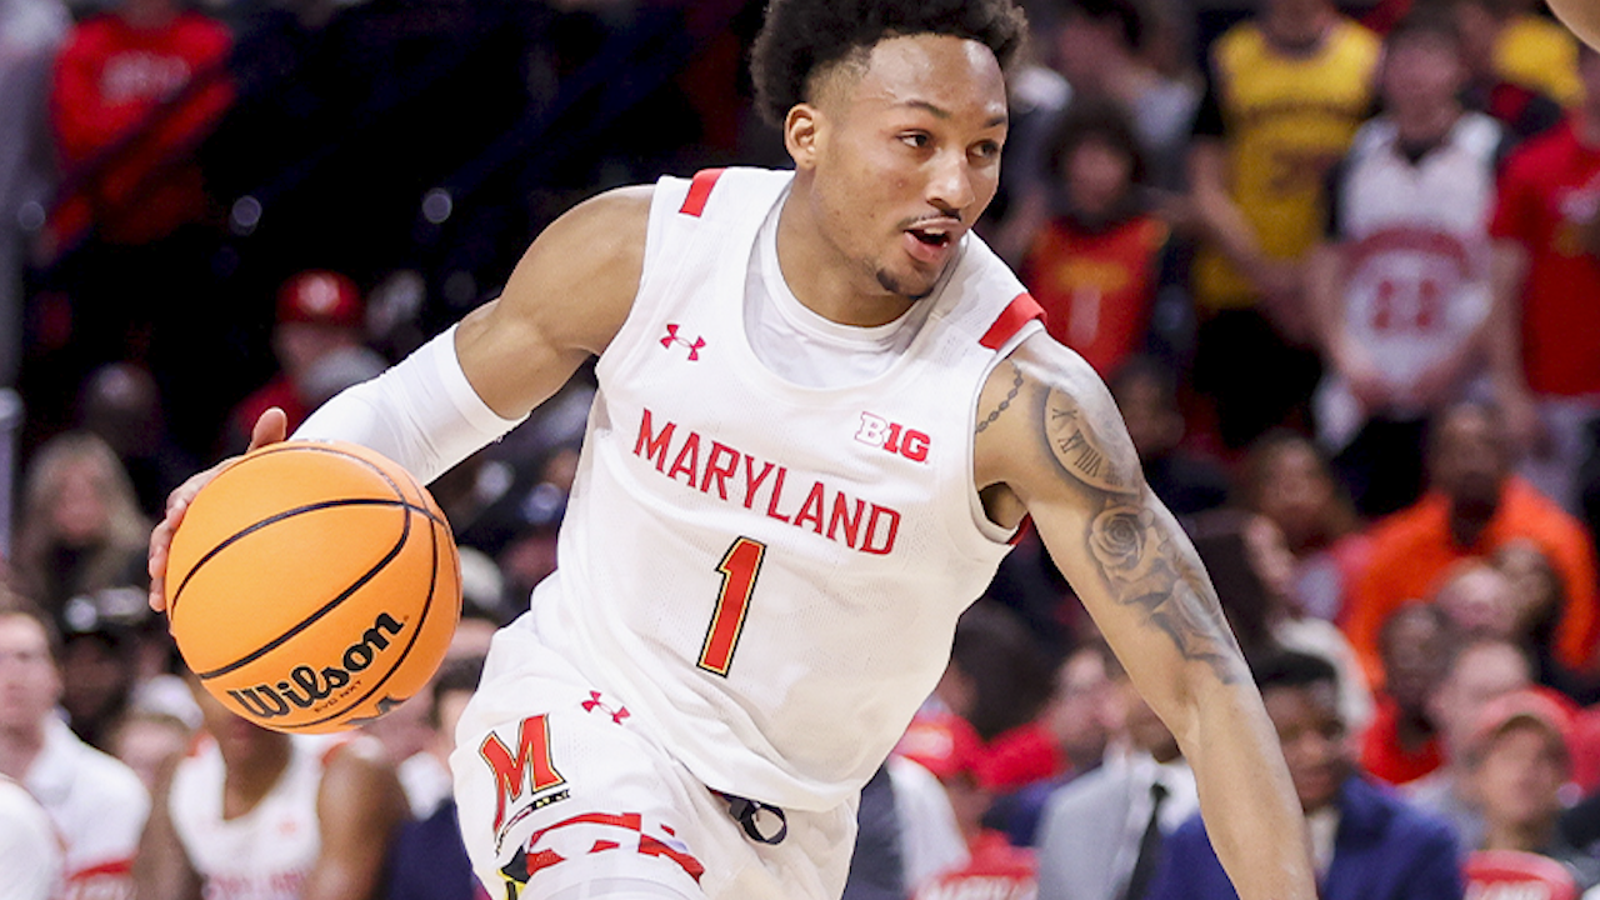 Jahmir Young leads Maryland with 20 points